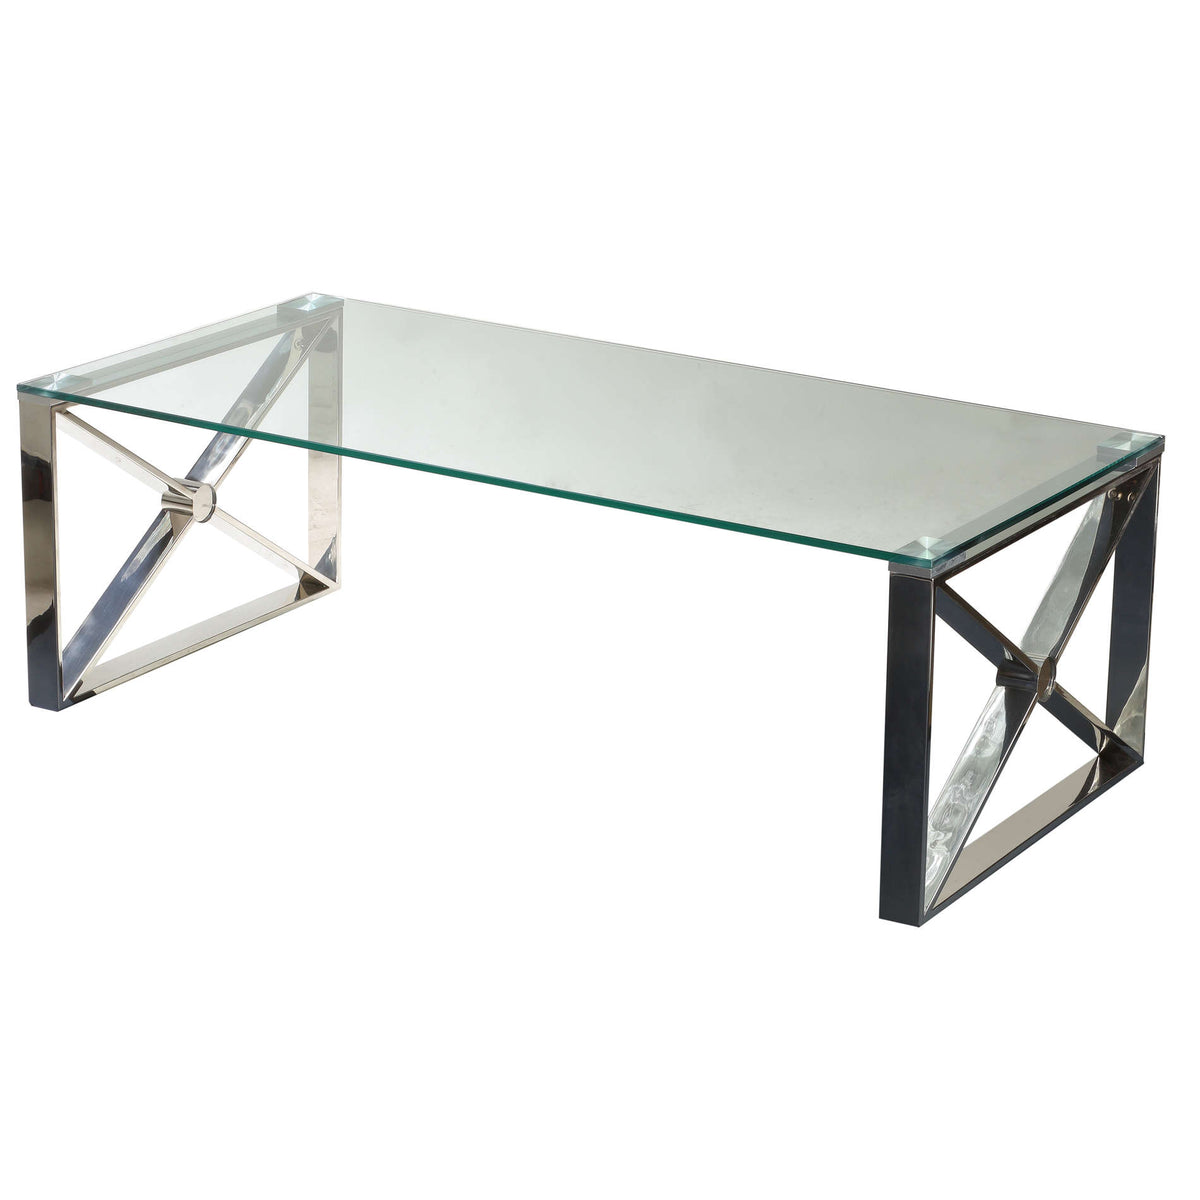 Cortesi Home Moses Contemporary Glass Coffee Table in Polished Stainless Steel, 48x24x16